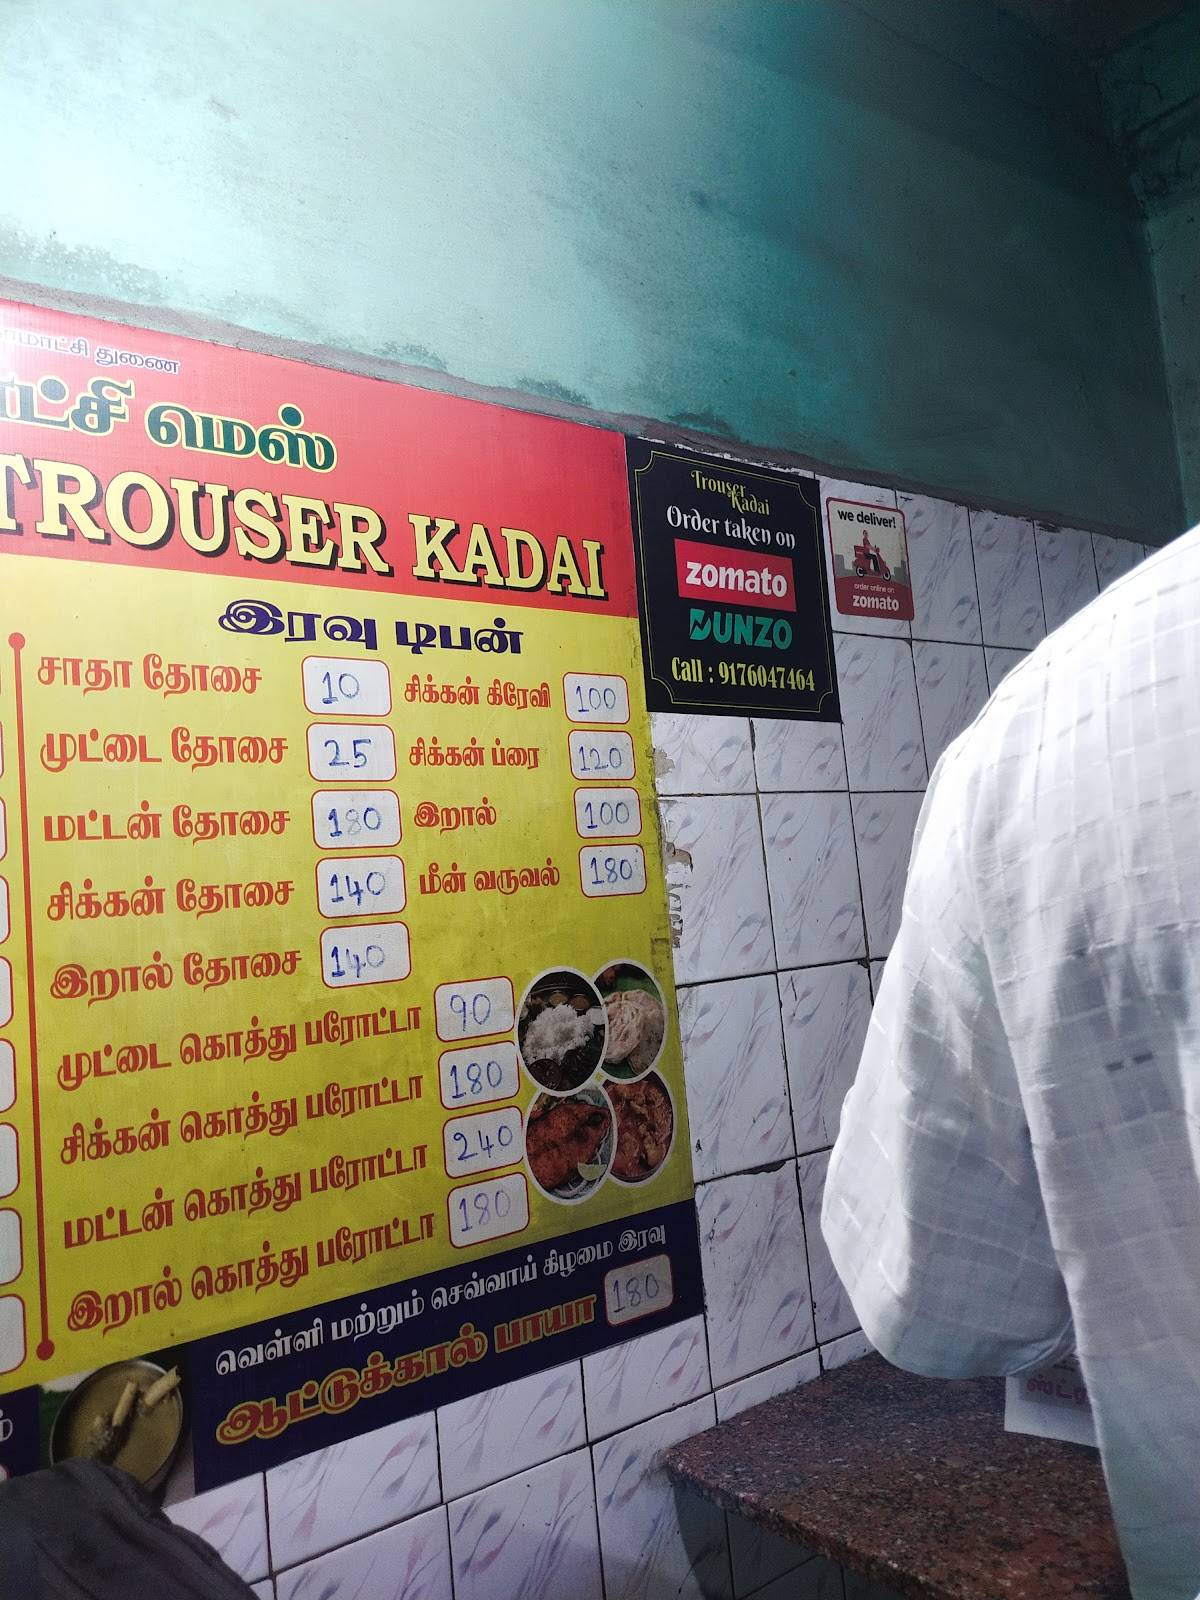 Trouser Kadai Review  Chennai food cooking  Trouser kadai is a small  restaurant located Mandayveli in Chennai The founder Rajendran is 73 years  old but still he is taking care of